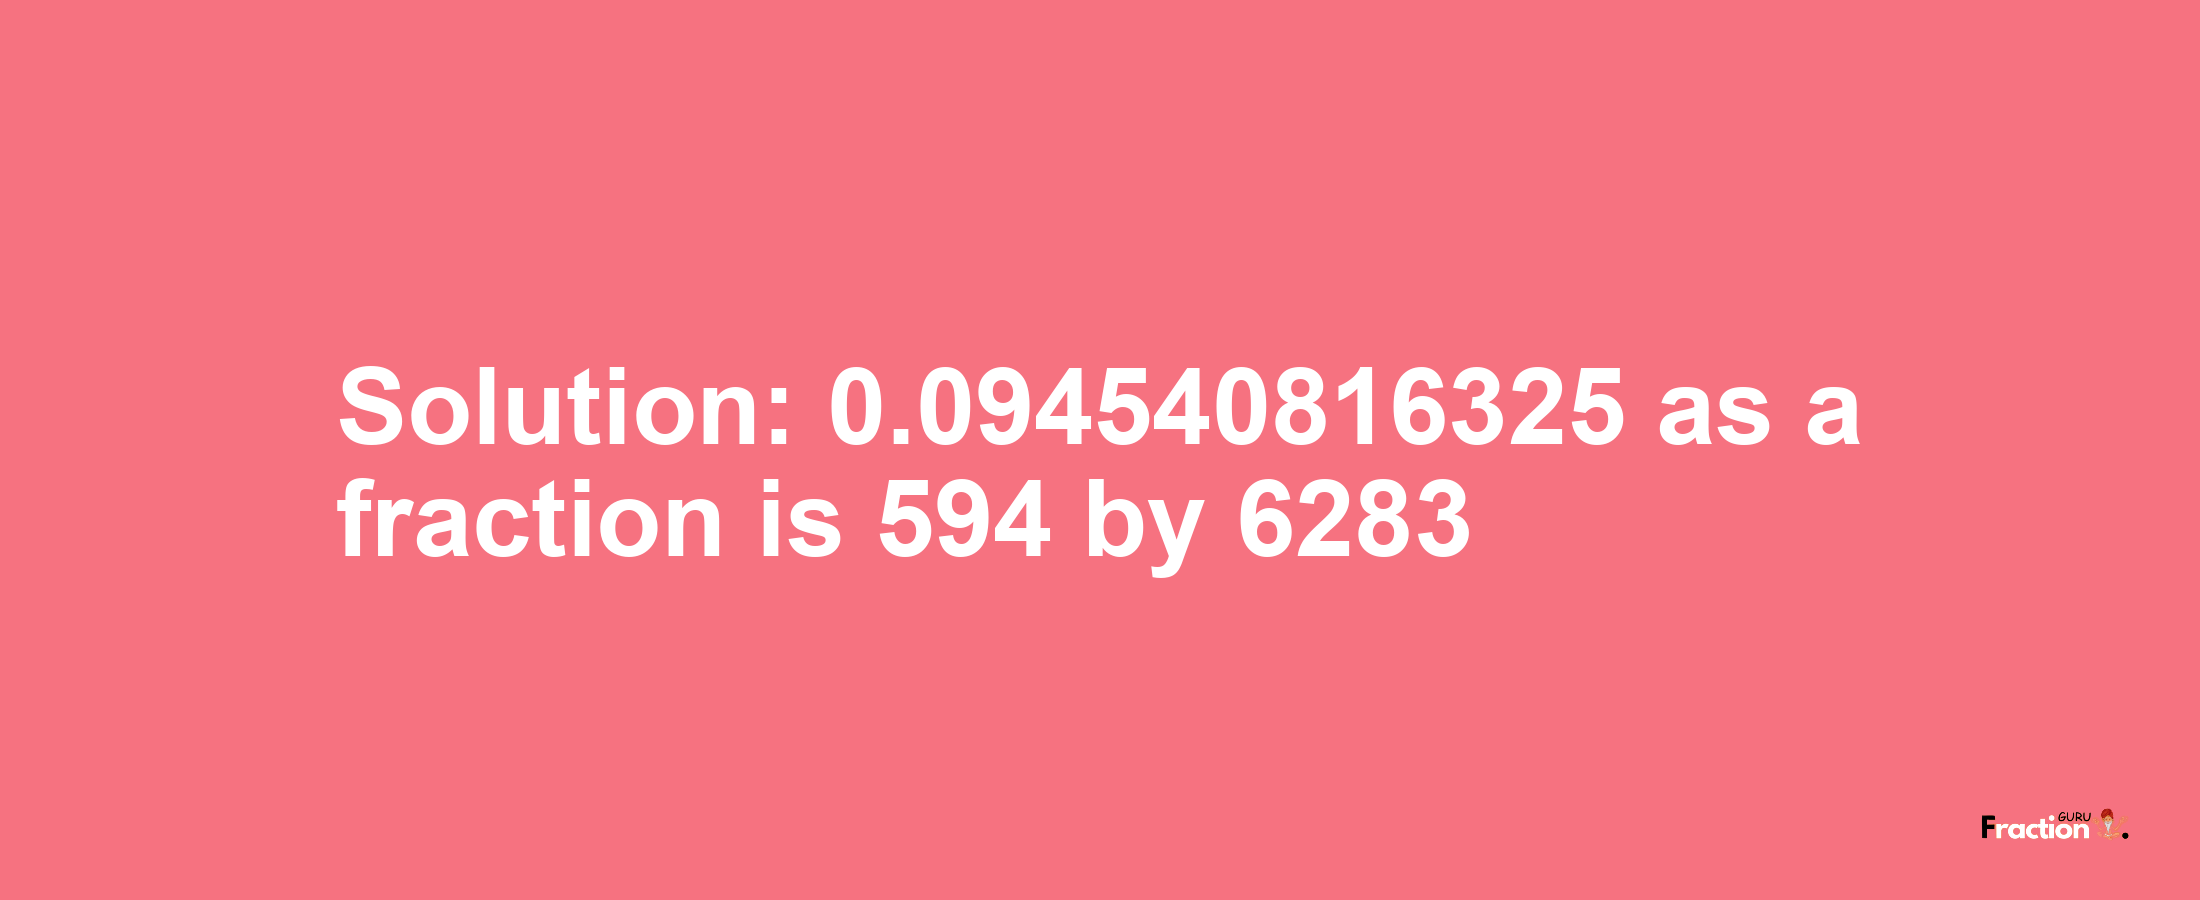 Solution:0.094540816325 as a fraction is 594/6283